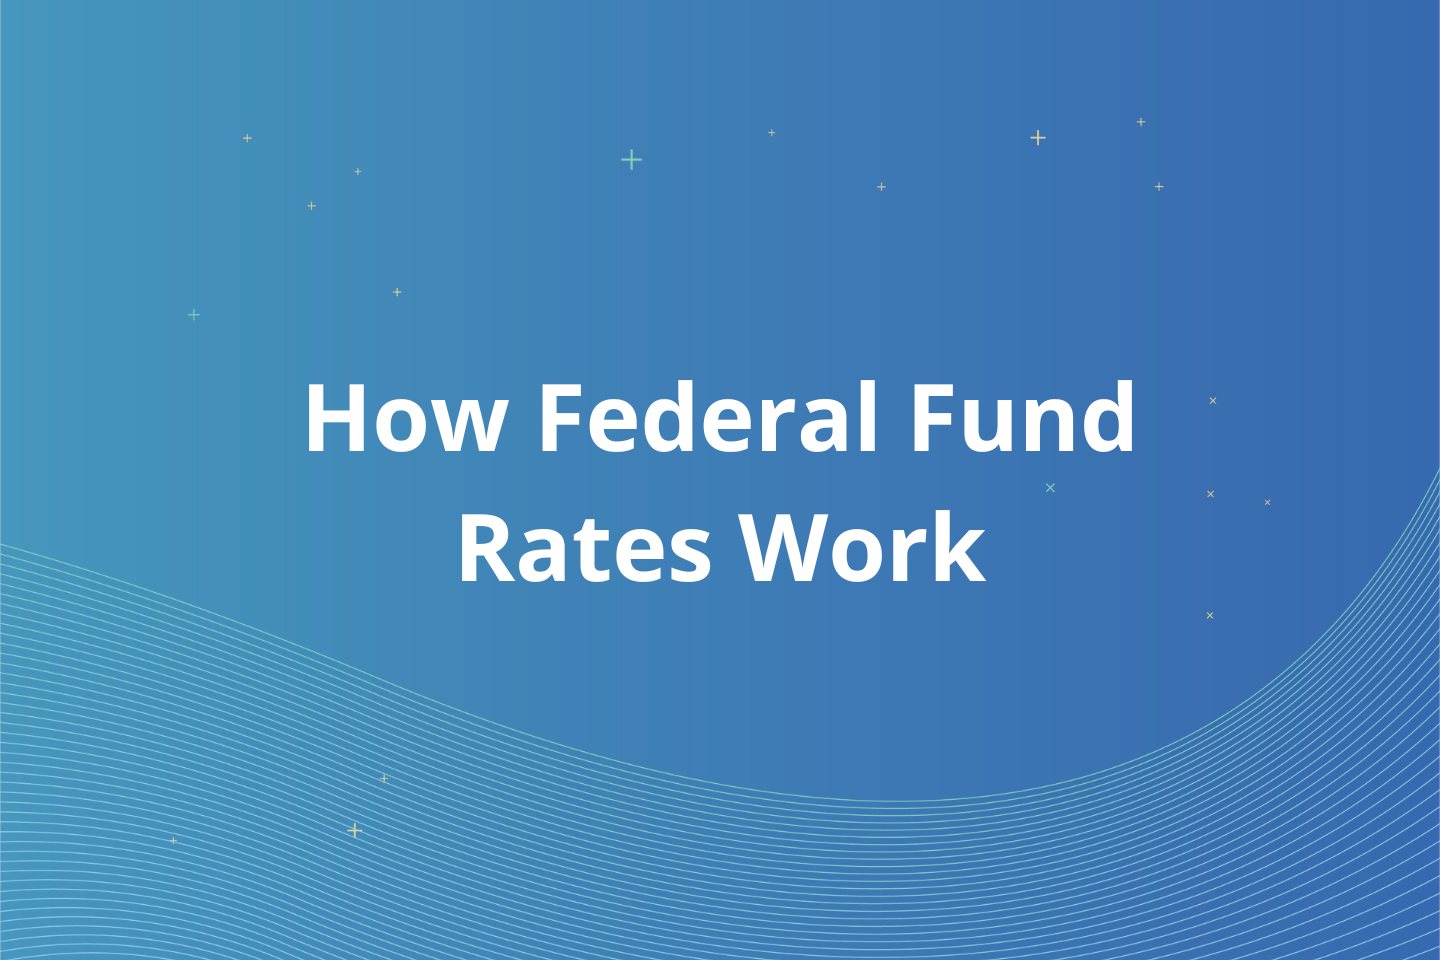 How Does the Federal Fund Rate Work?